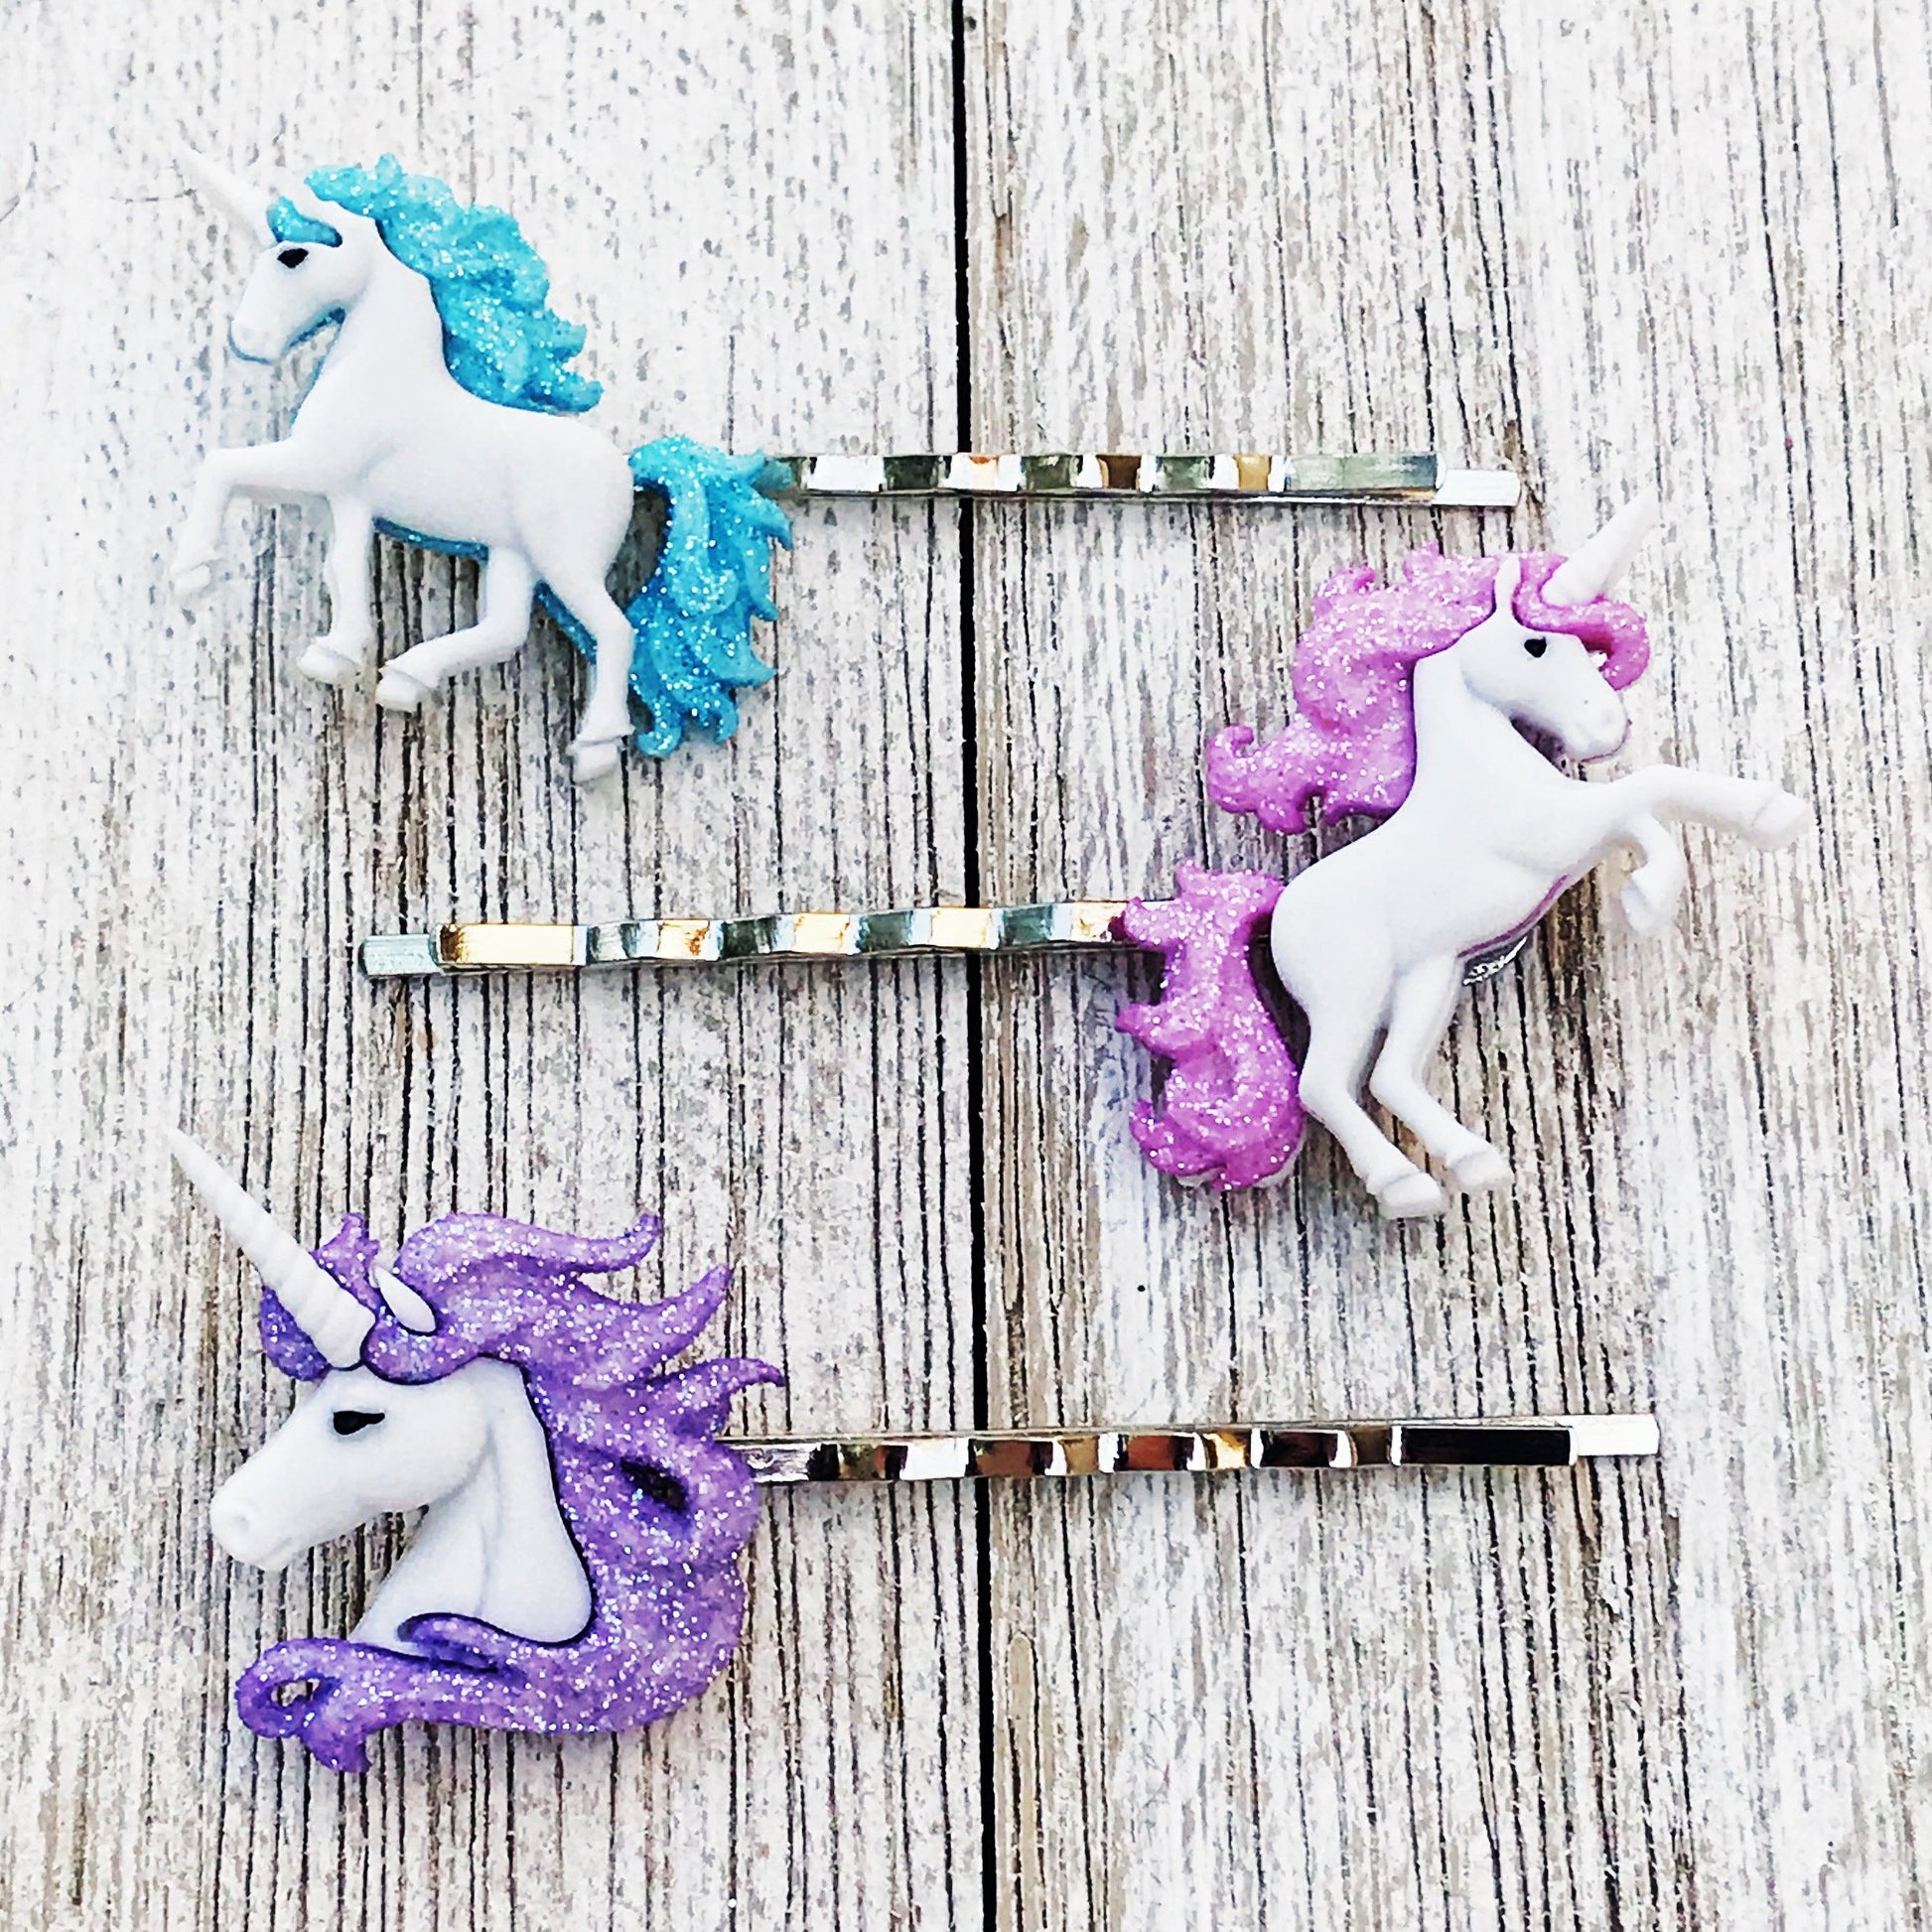 Unicorn Hair Pins Set: Whimsical Trio in Pink, Blue, & Purple for Enchanting Hairstyles